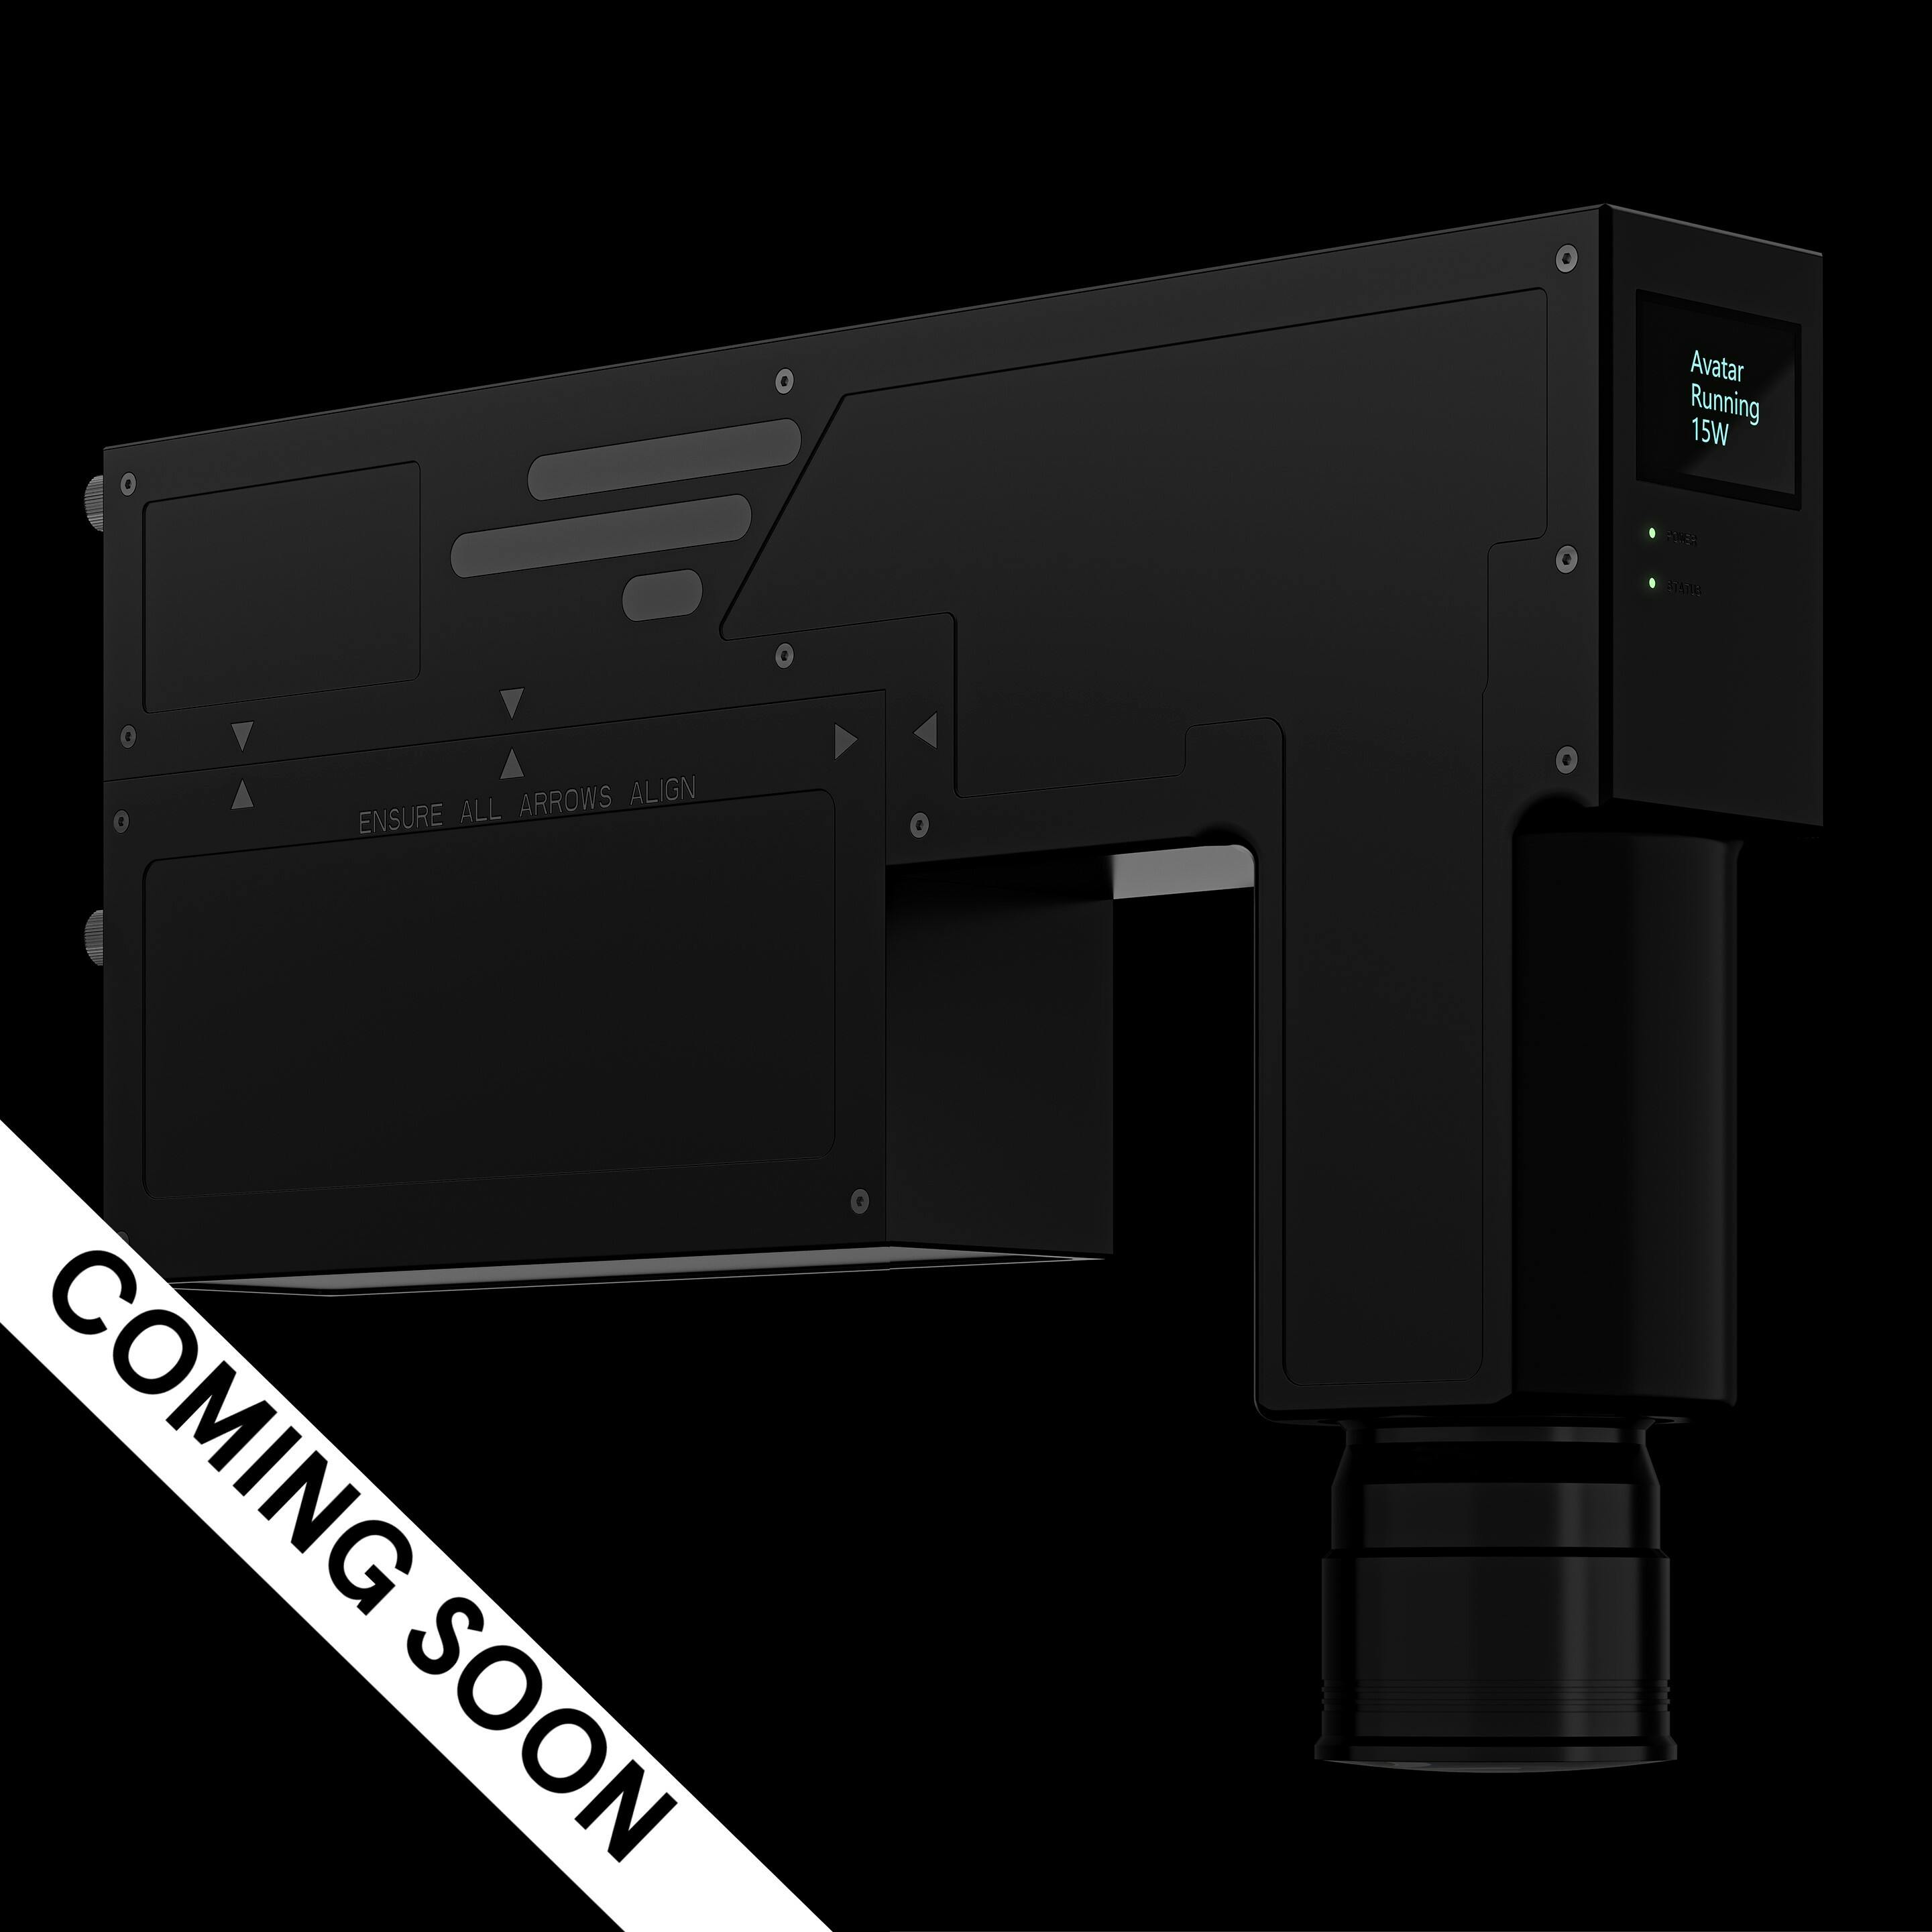 first native 4K Light Engine coming soon